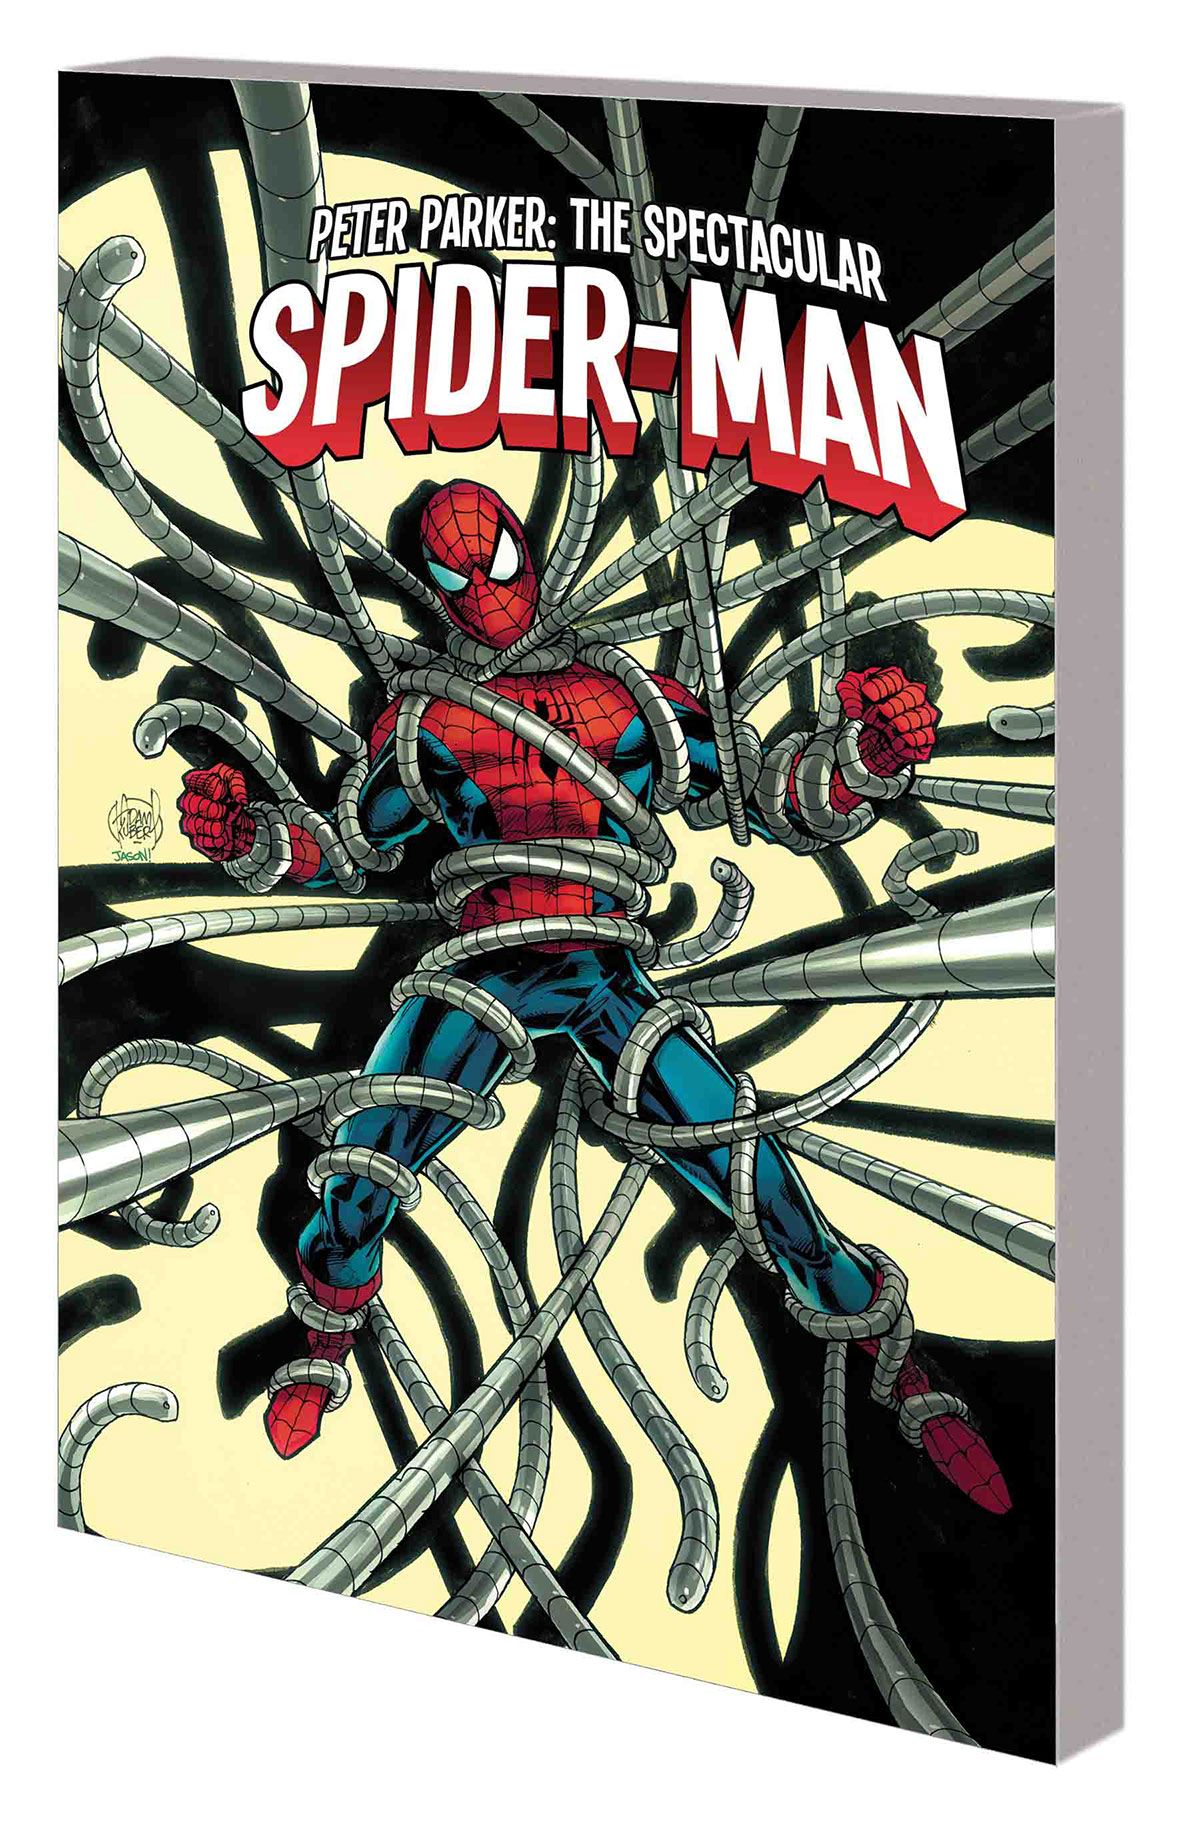 PETER PARKER: THE SPECTACULAR SPIDER-MAN VOL. 4 TPB